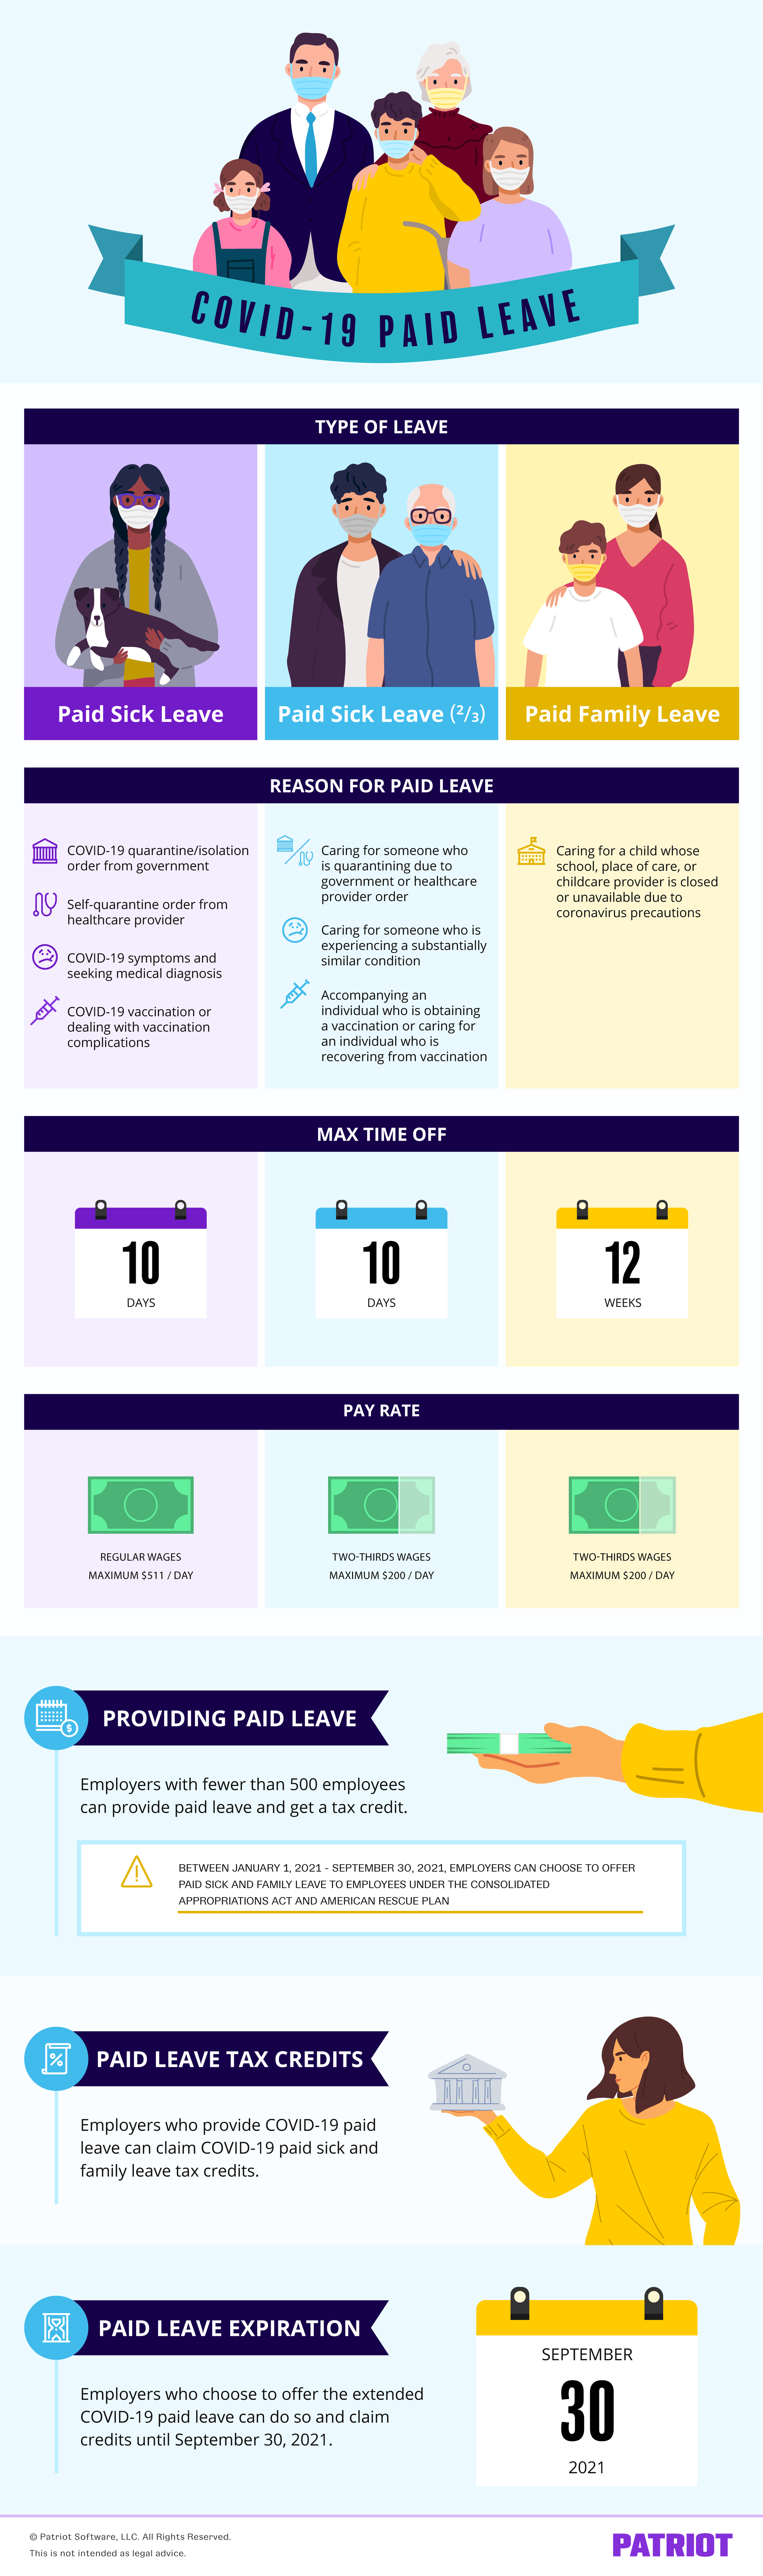 COVID paid leave infographic detailing types of leave, reason for paid leave, max time off, pay rate, who can provide and receive a tax credit, and the expiration 